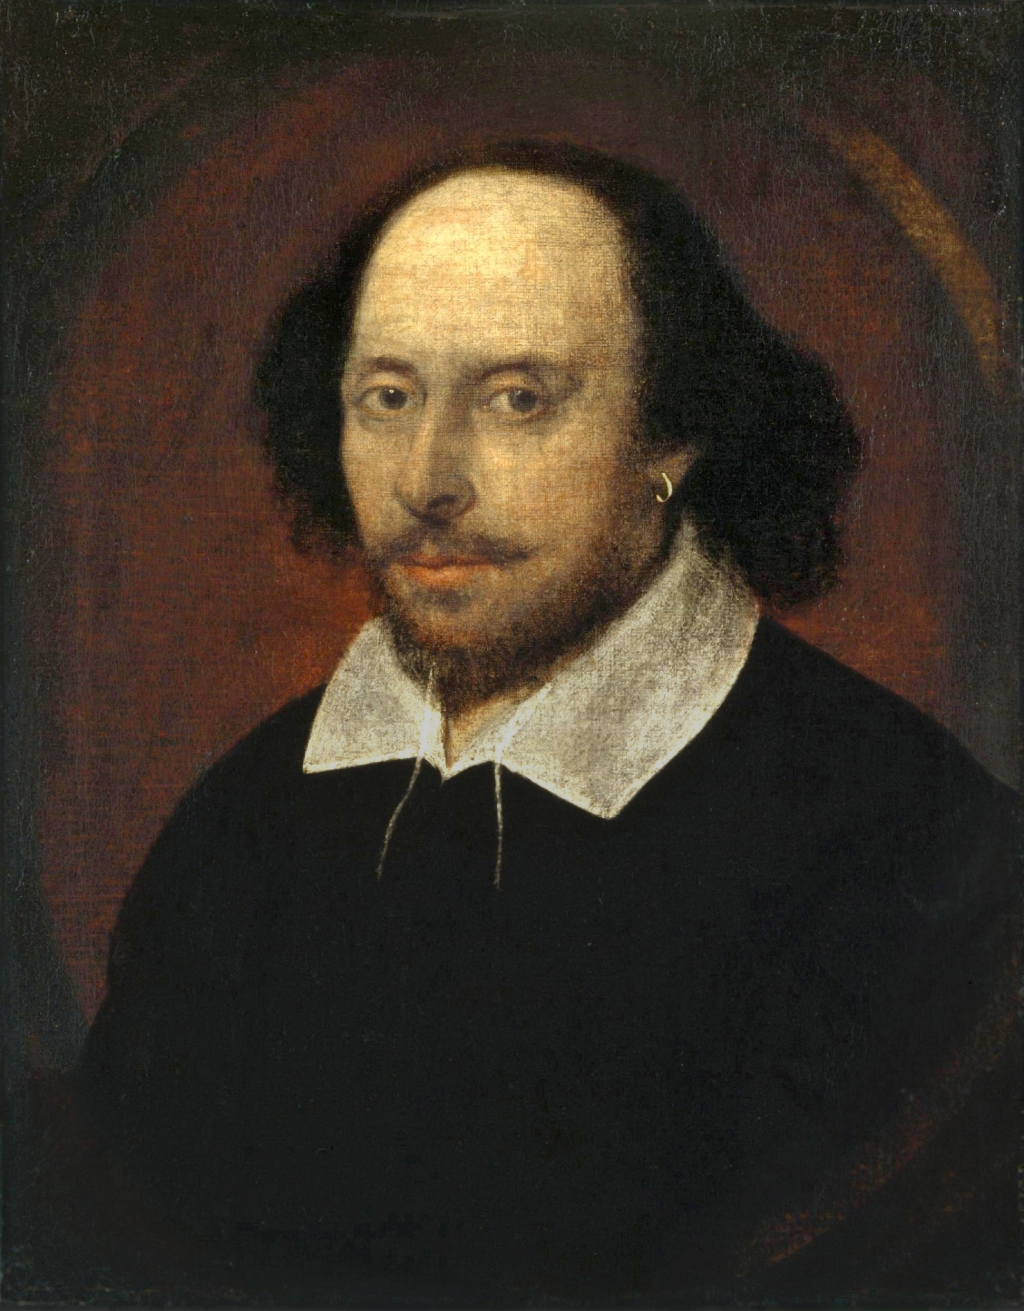 We’re all quoting Shakespeare, every day, without realising